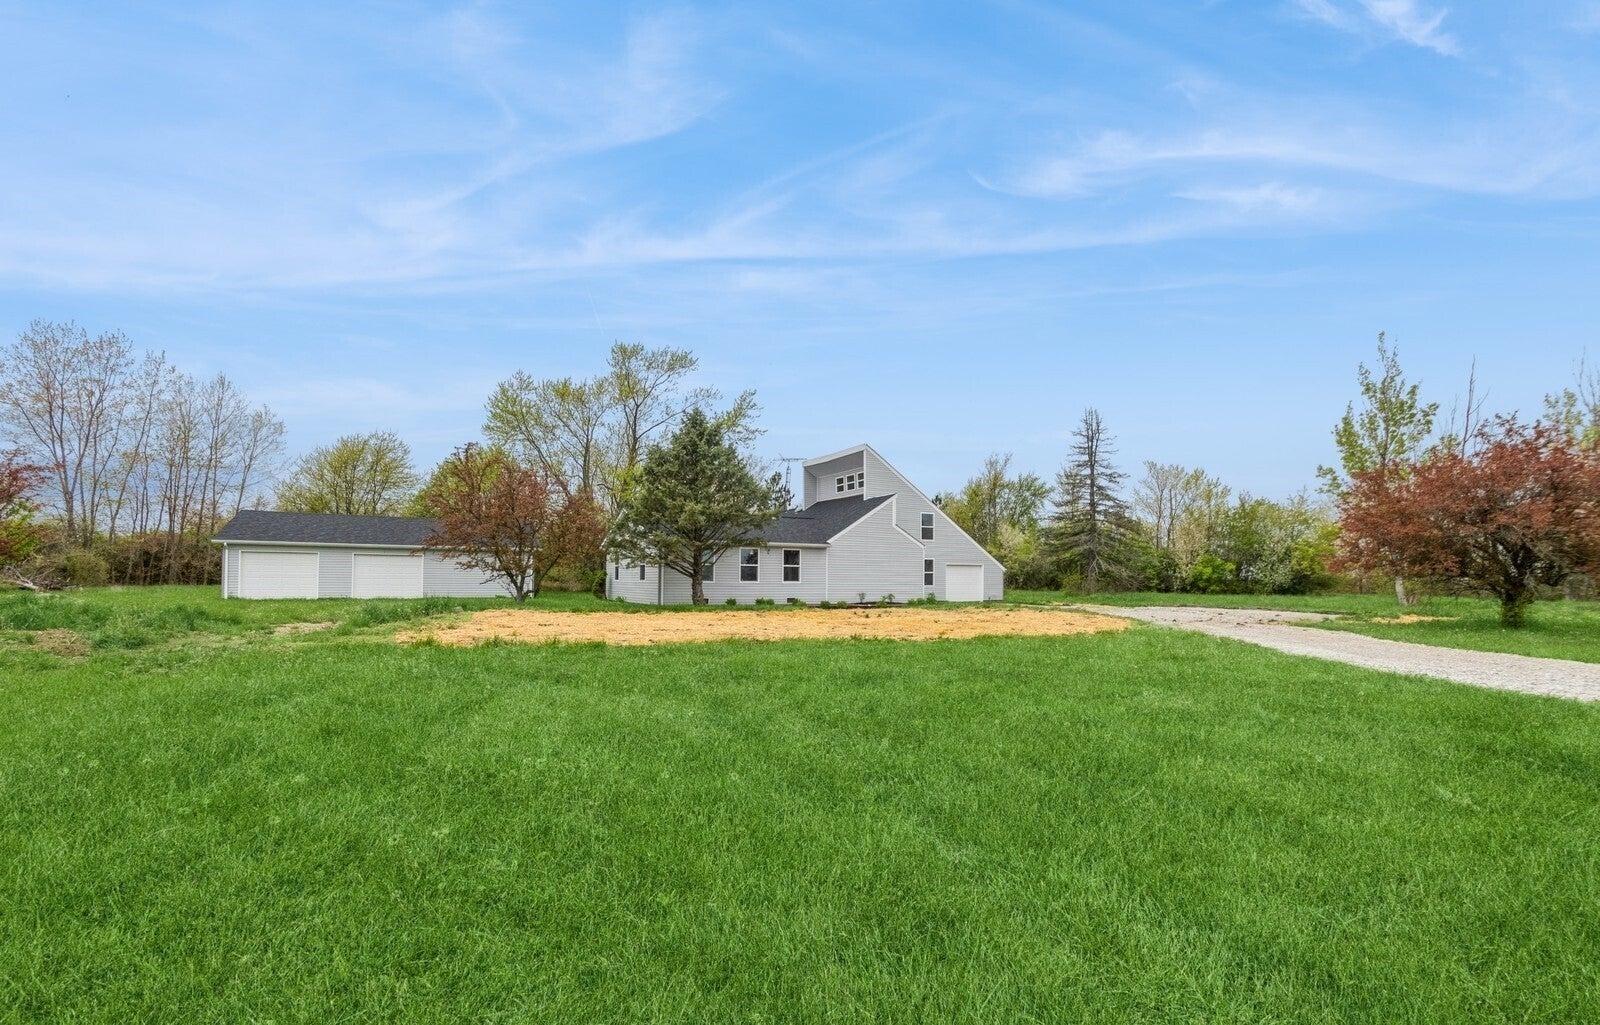 Photo of 5937 N County Road 400 W Middletown, IN 47356